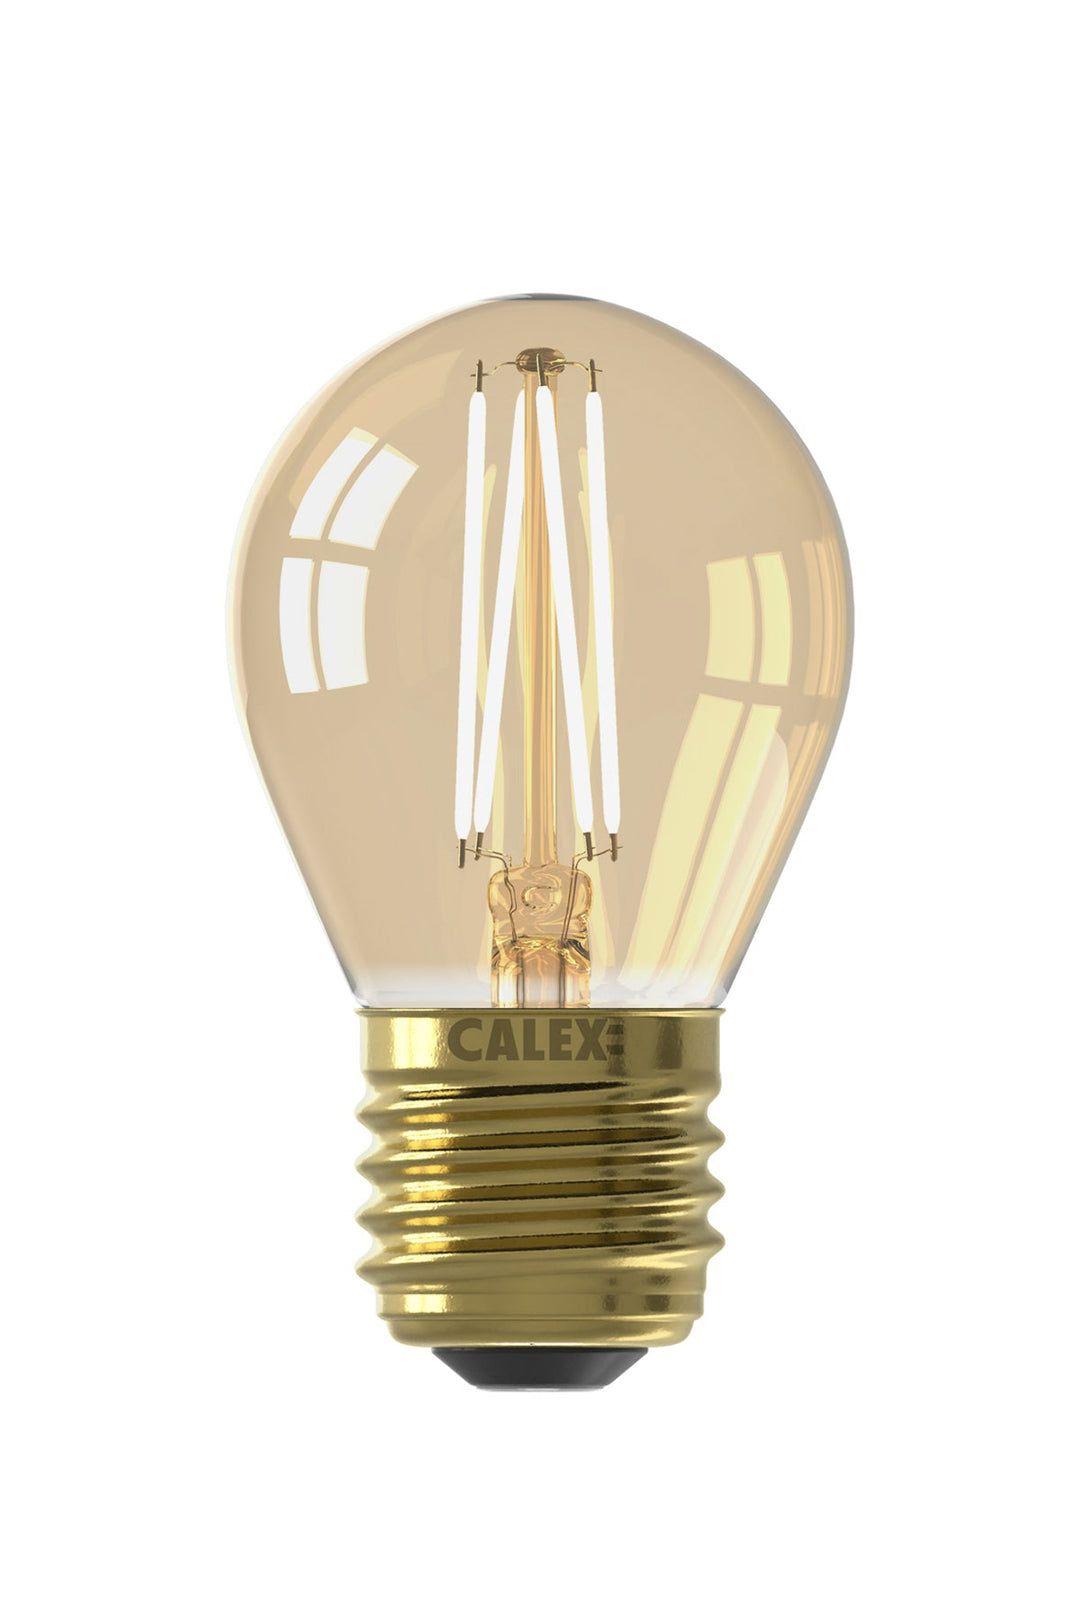 Calex LED Warm Filament Ball Lamp P45, Gold, E27, Dimmable 1101004900